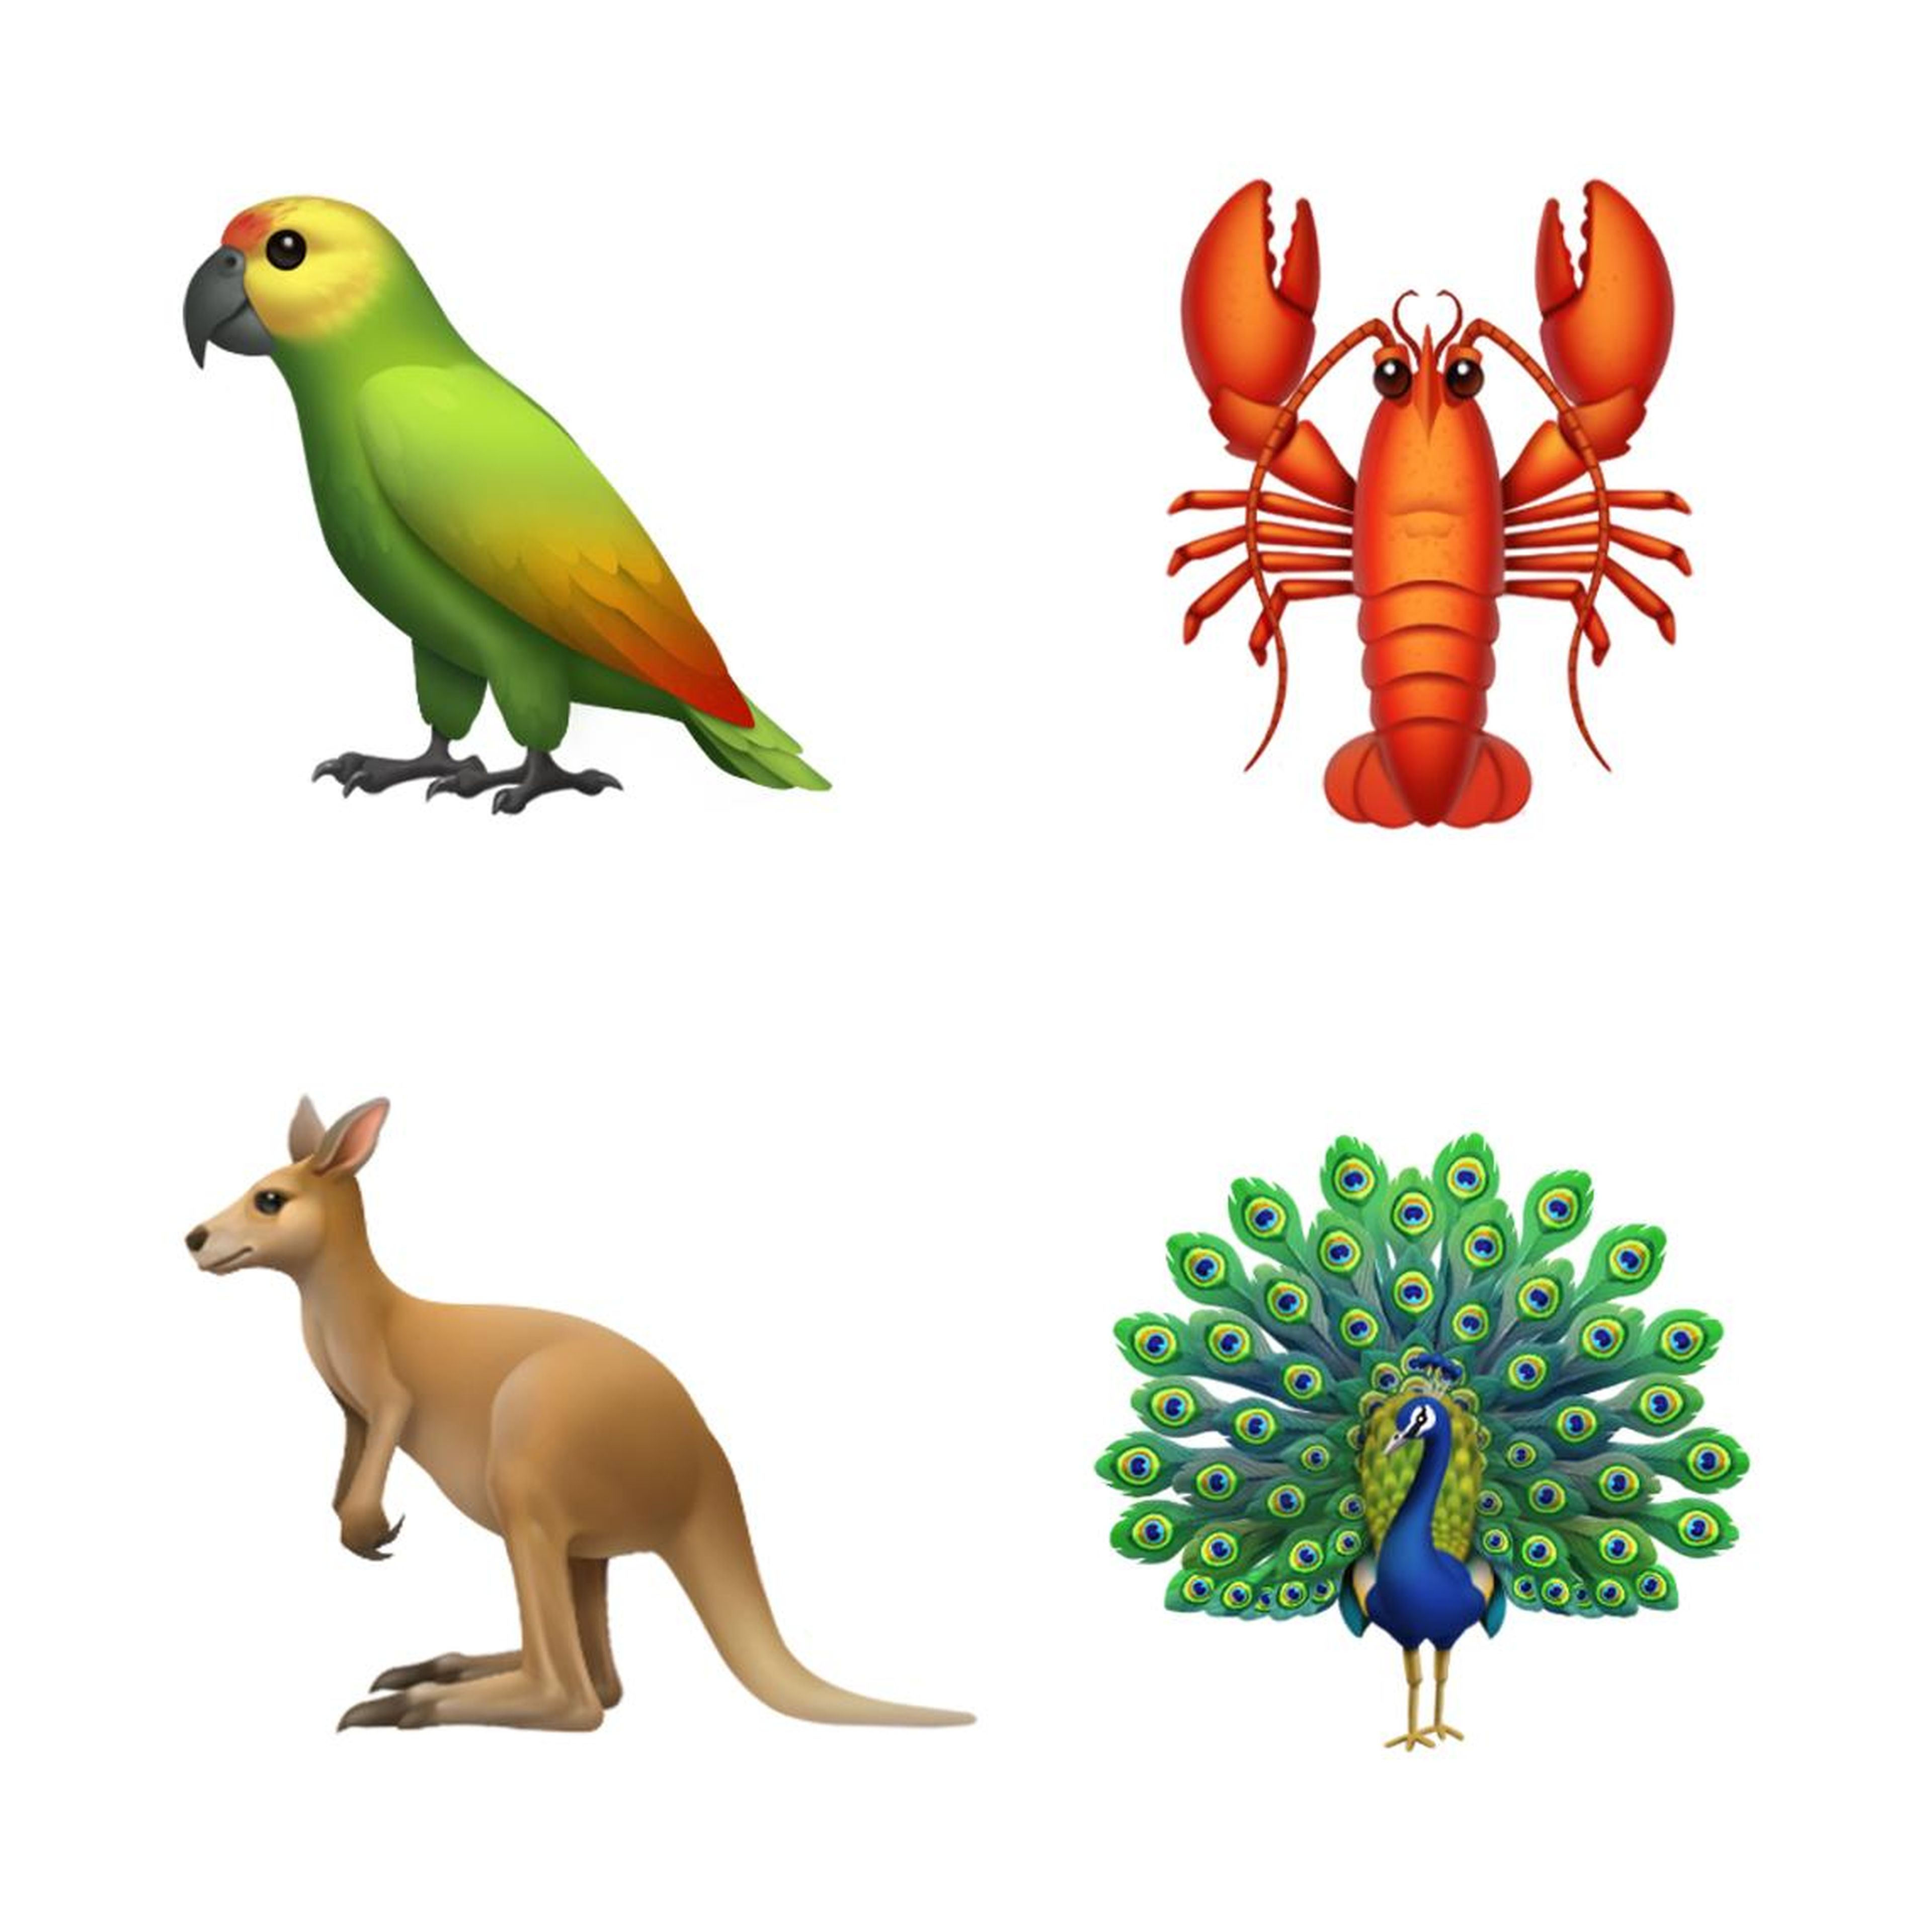 We'll be getting some new animals, too — the new set of emoji includes a lobster, peacock, kangaroo, parrot, and more.